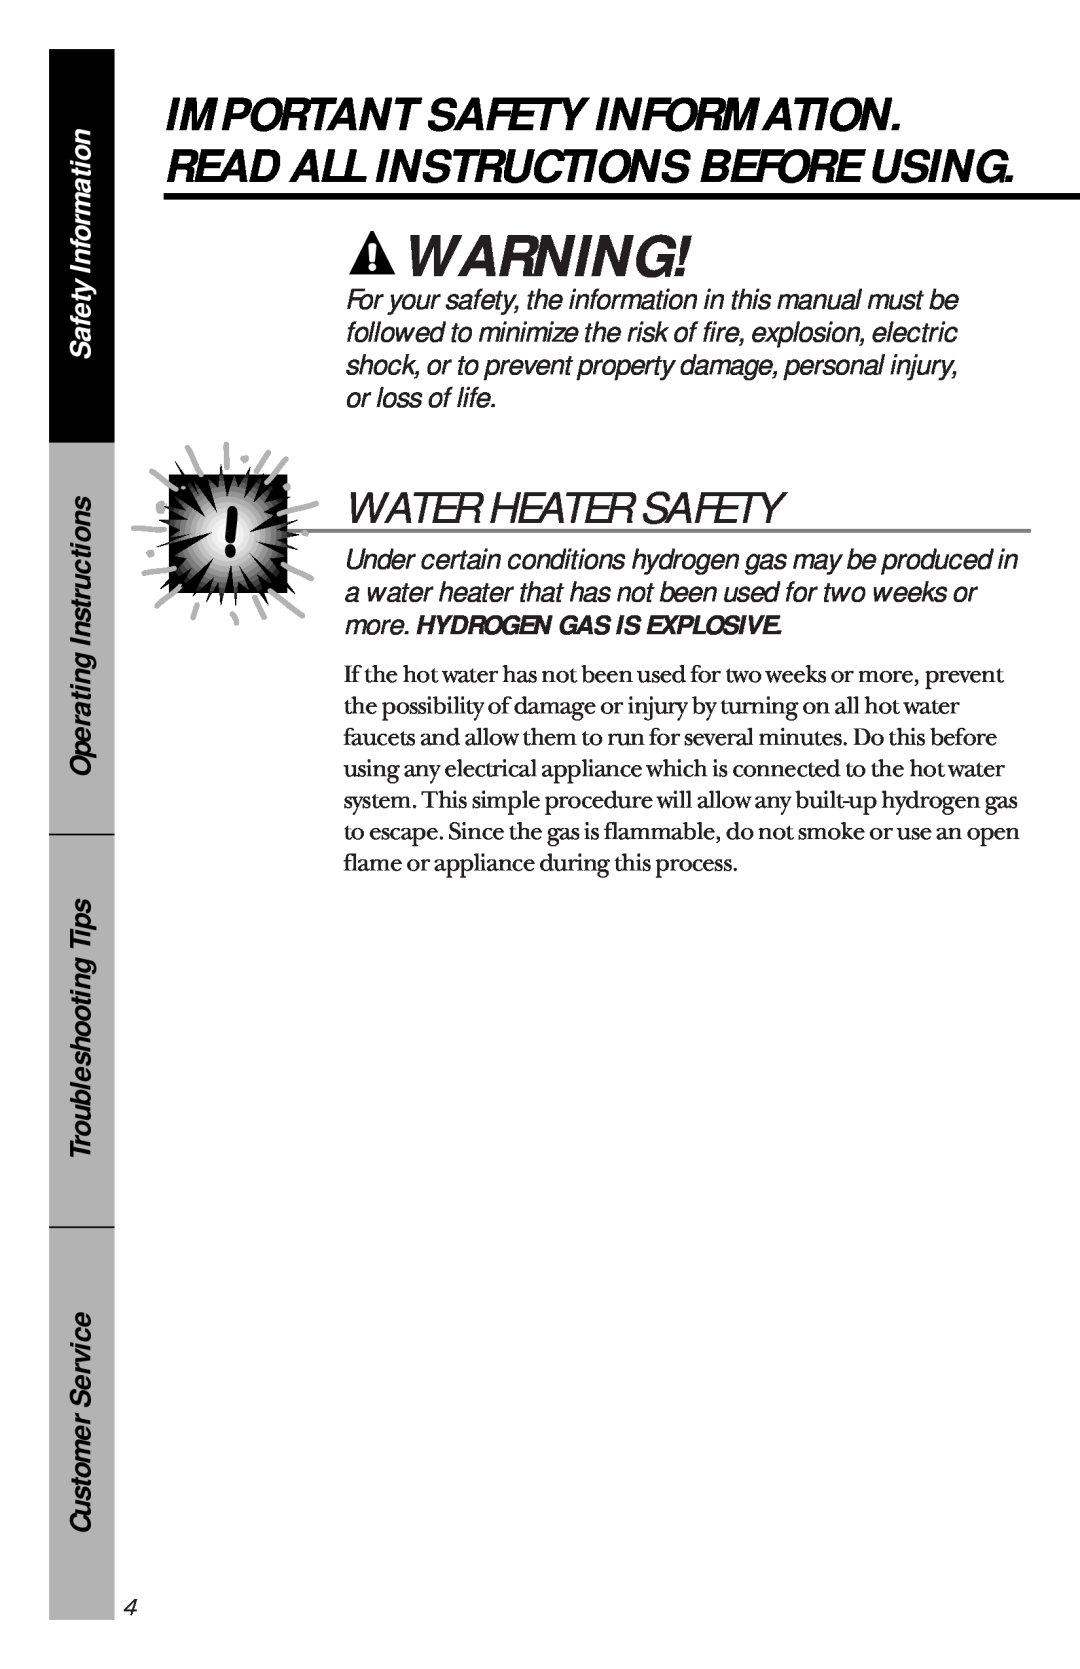 GE GSD3810, GSD3920, GSD3830, GSD3410 Water Heater Safety, Important Safety Information. Read All Instructions Before Using 